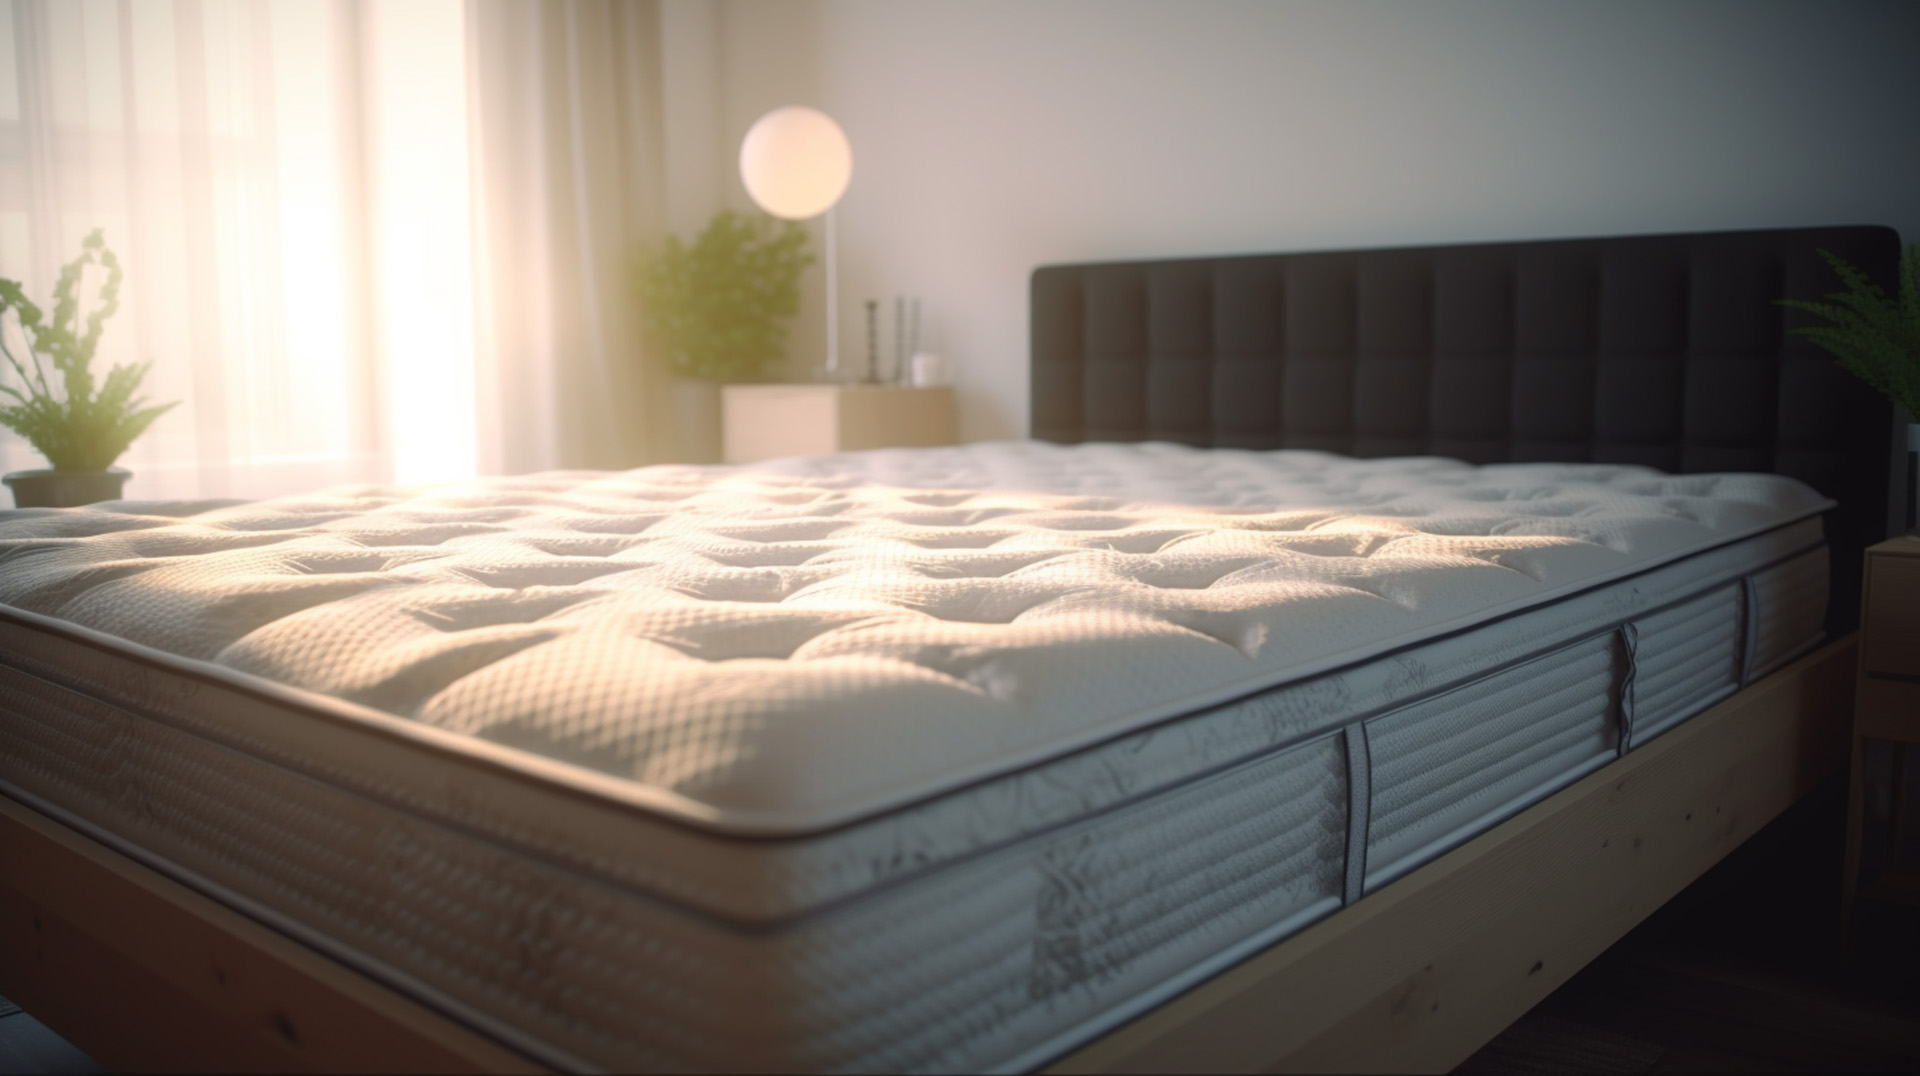 Shop Organic Mattresses and Beds in Westminster, CO